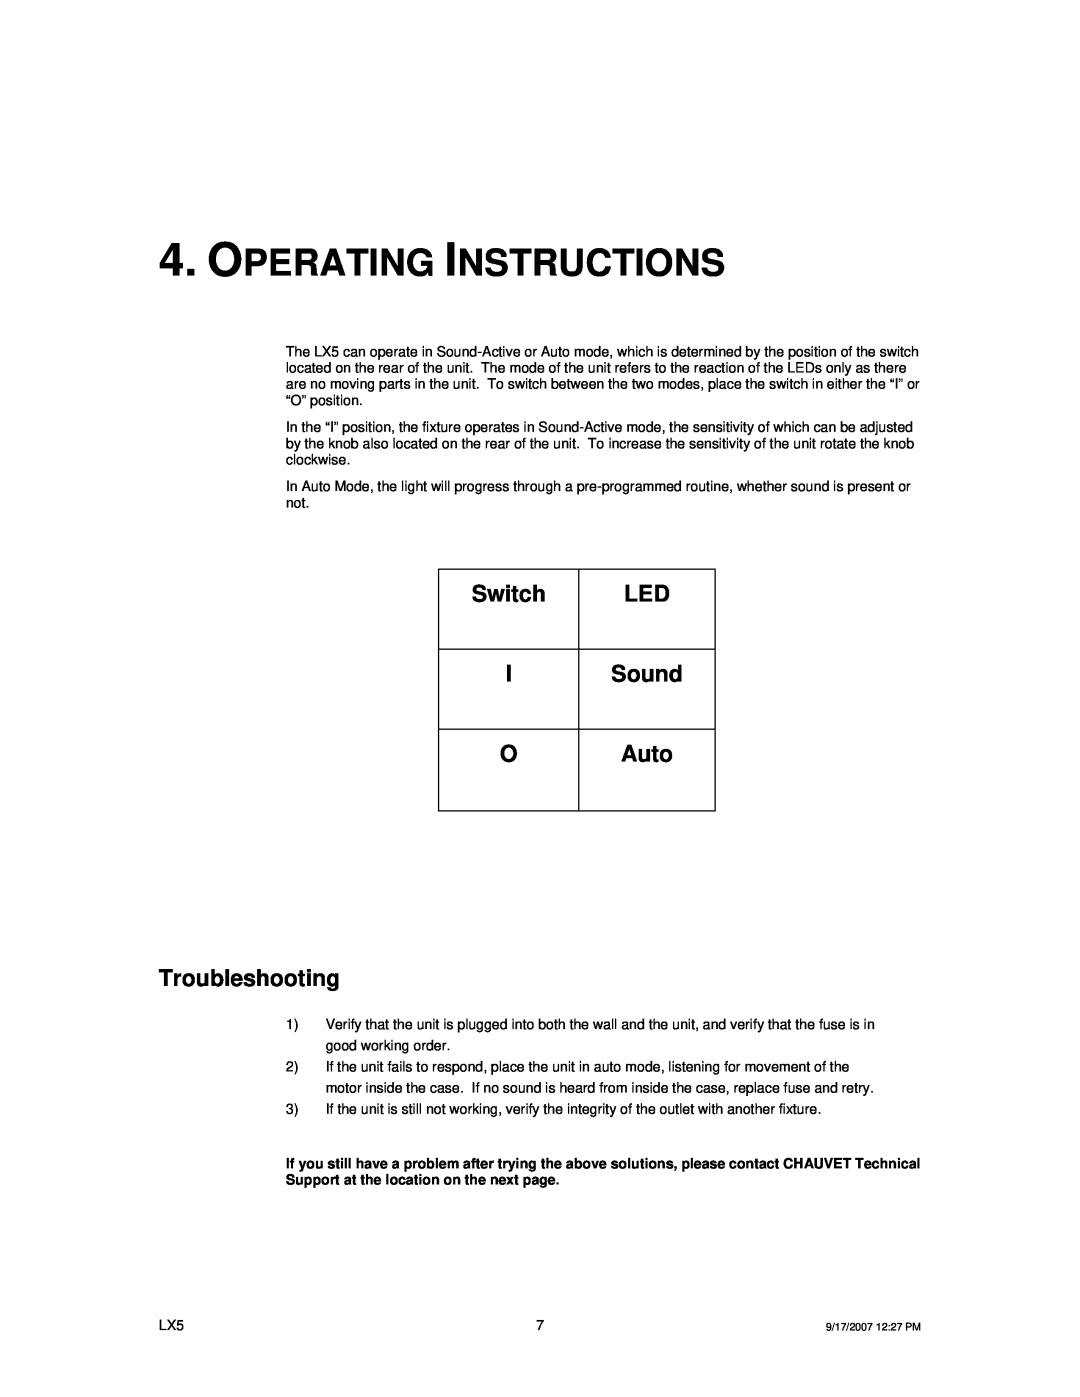 Chauvet LX5 user manual Operating Instructions, Switch, Sound, Auto, Troubleshooting 